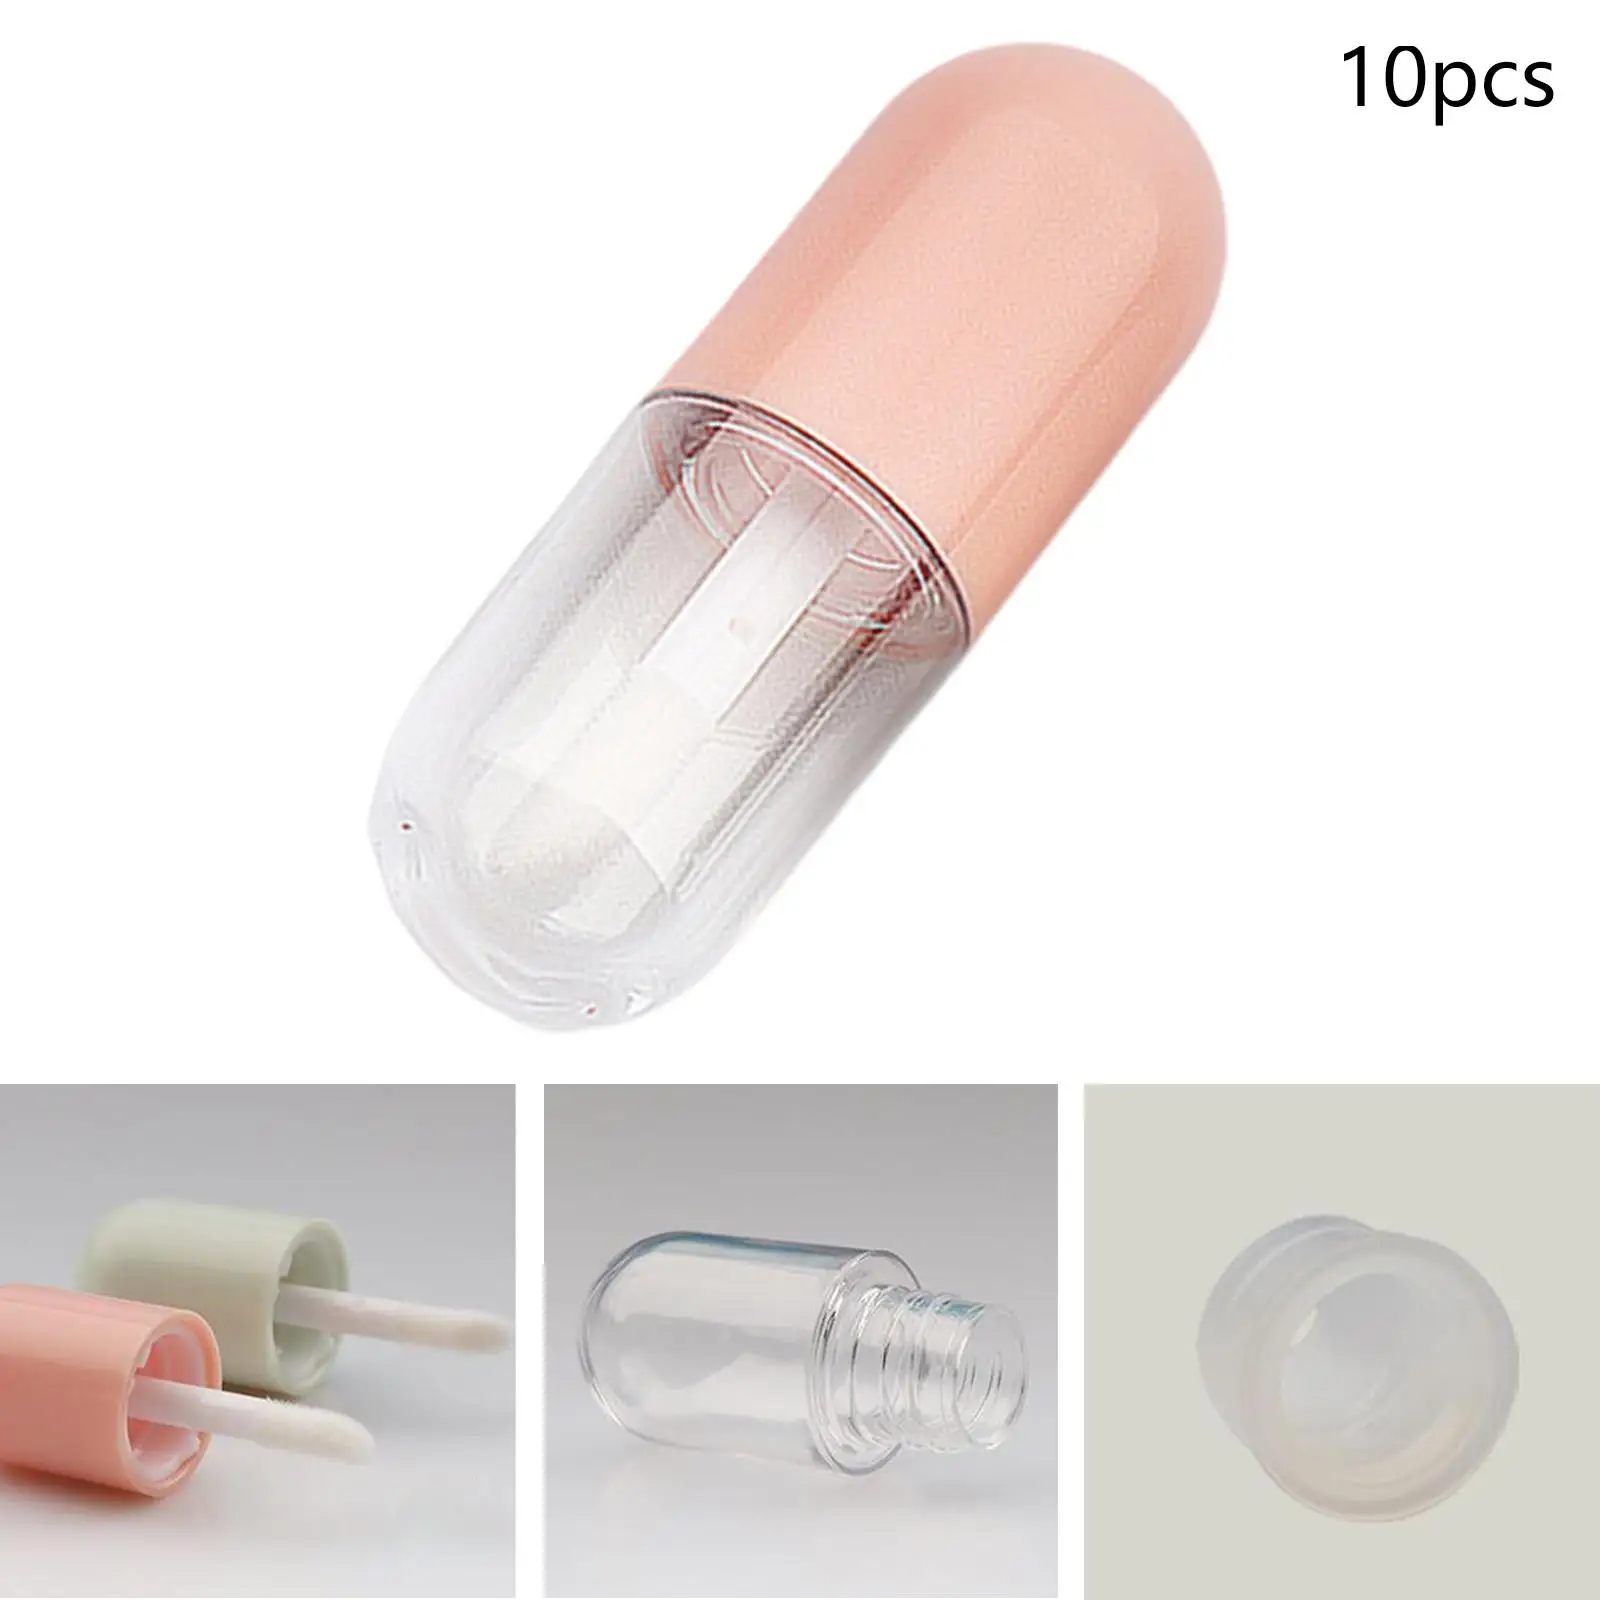 10x Container with Insert Stoppers Adorable Holder Samples Bottle Tubes for DIY Cosmetic Samples Travel Women Girl